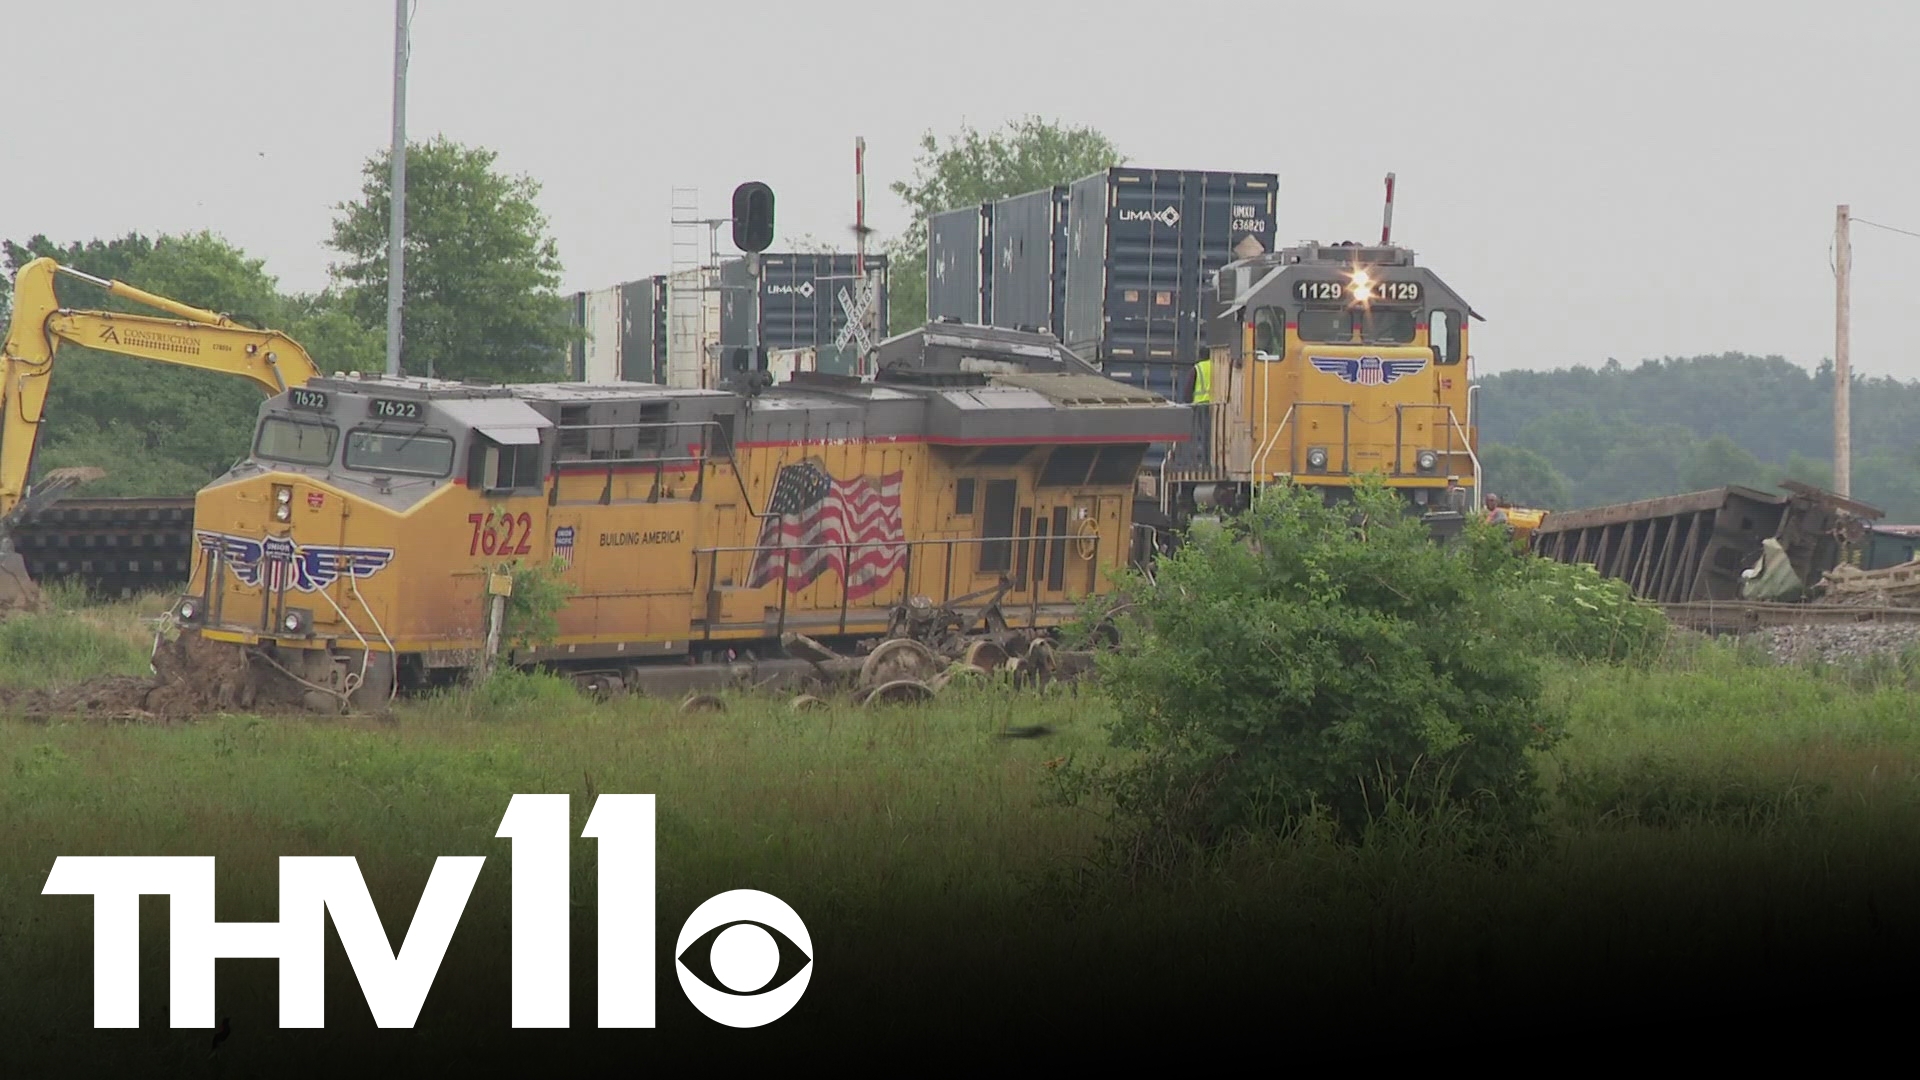 Officials are investigating the cause of a train derailment in Arkansas County near Stuttgart. The train went off the tracks and onto Highway 79, blocking traffic.